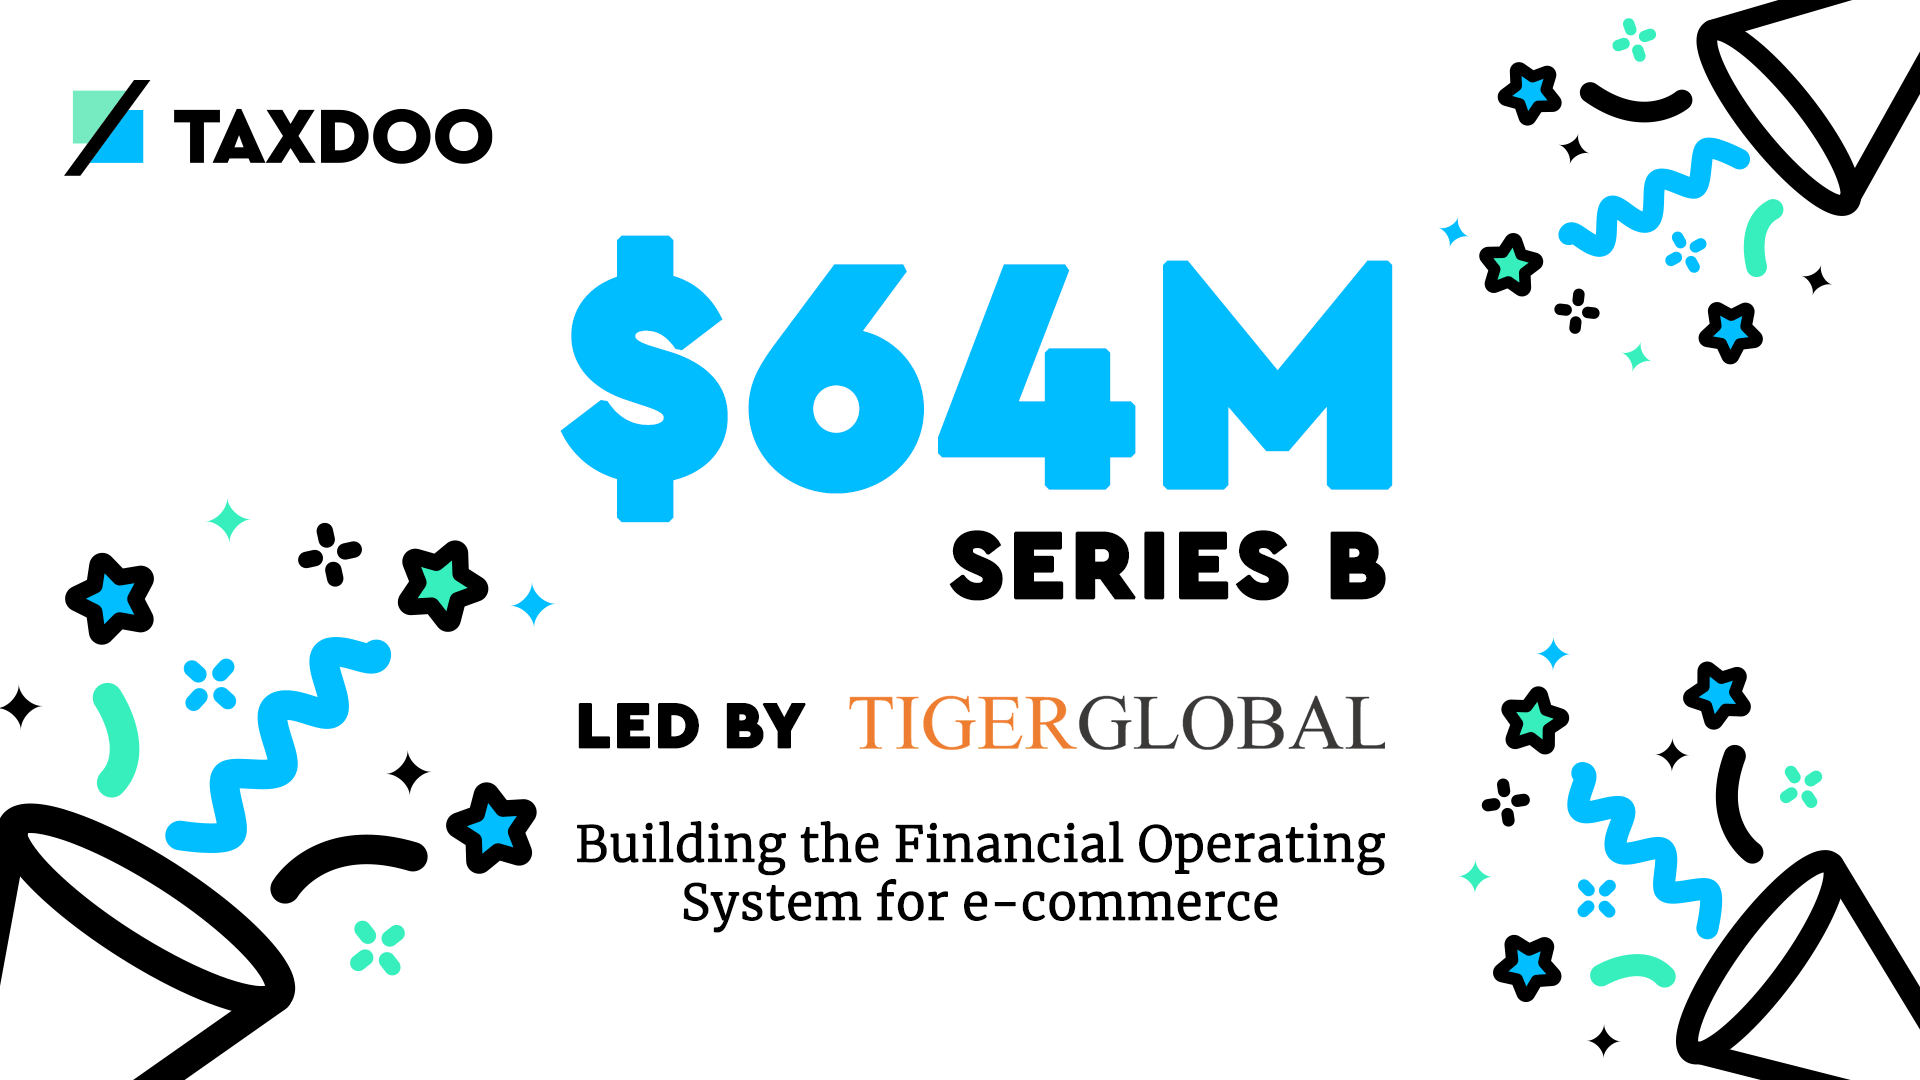 Announcing our $64M Series B